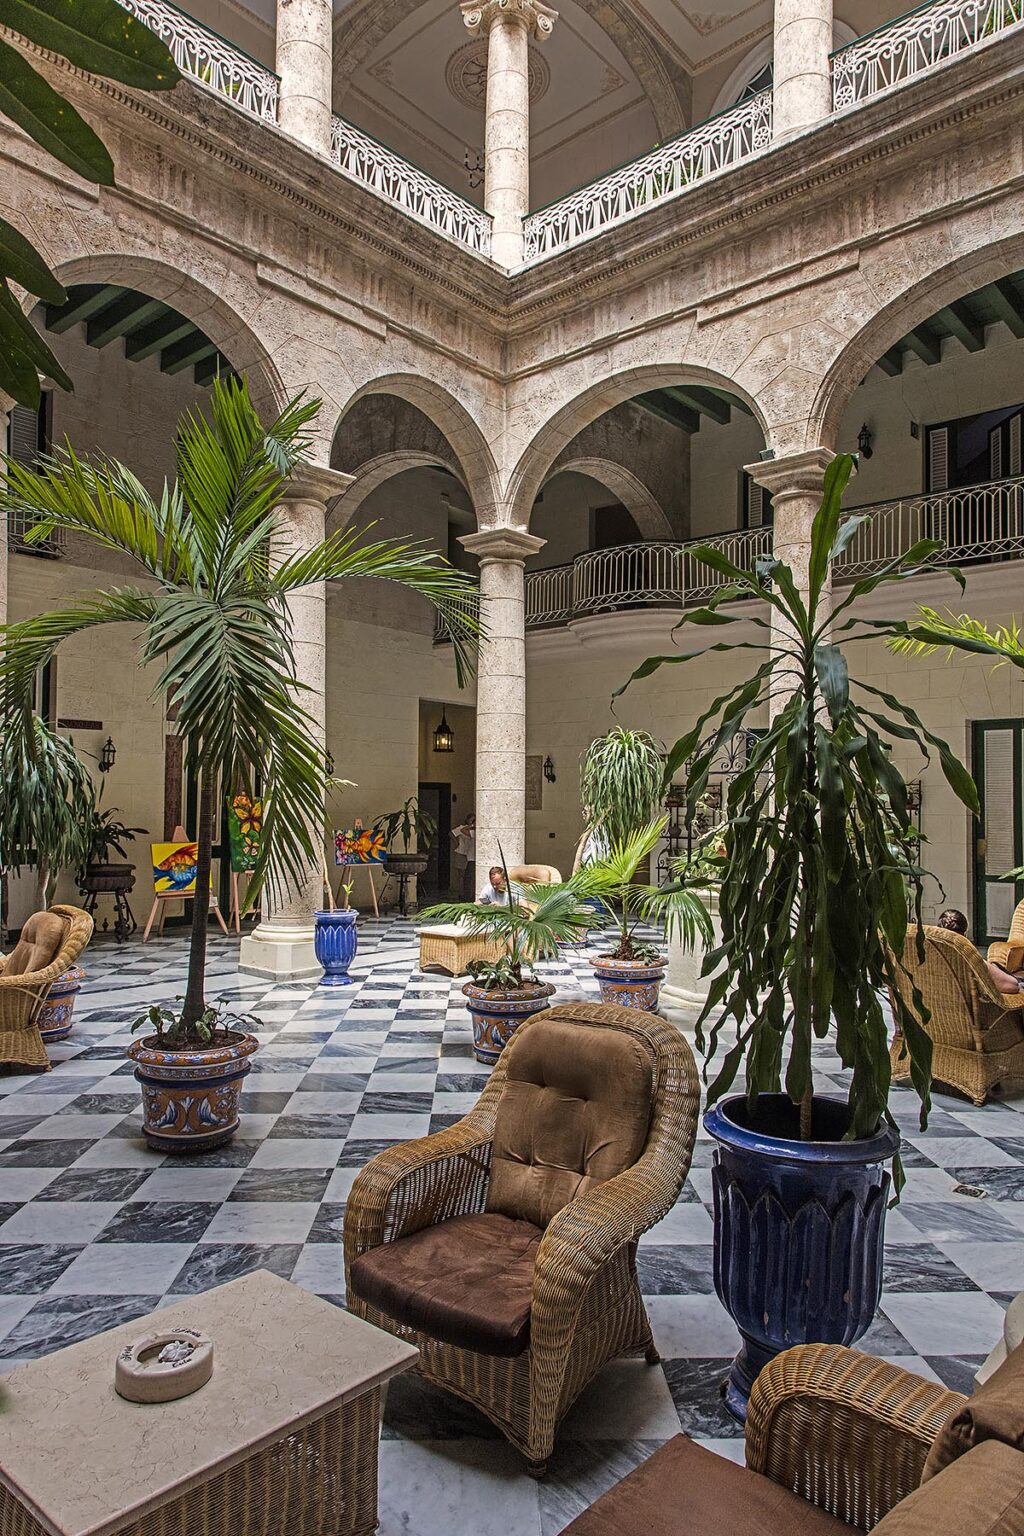 The inner courtyard and lounging area of the HOTEL FLORIDA - HAVANA, CUBA